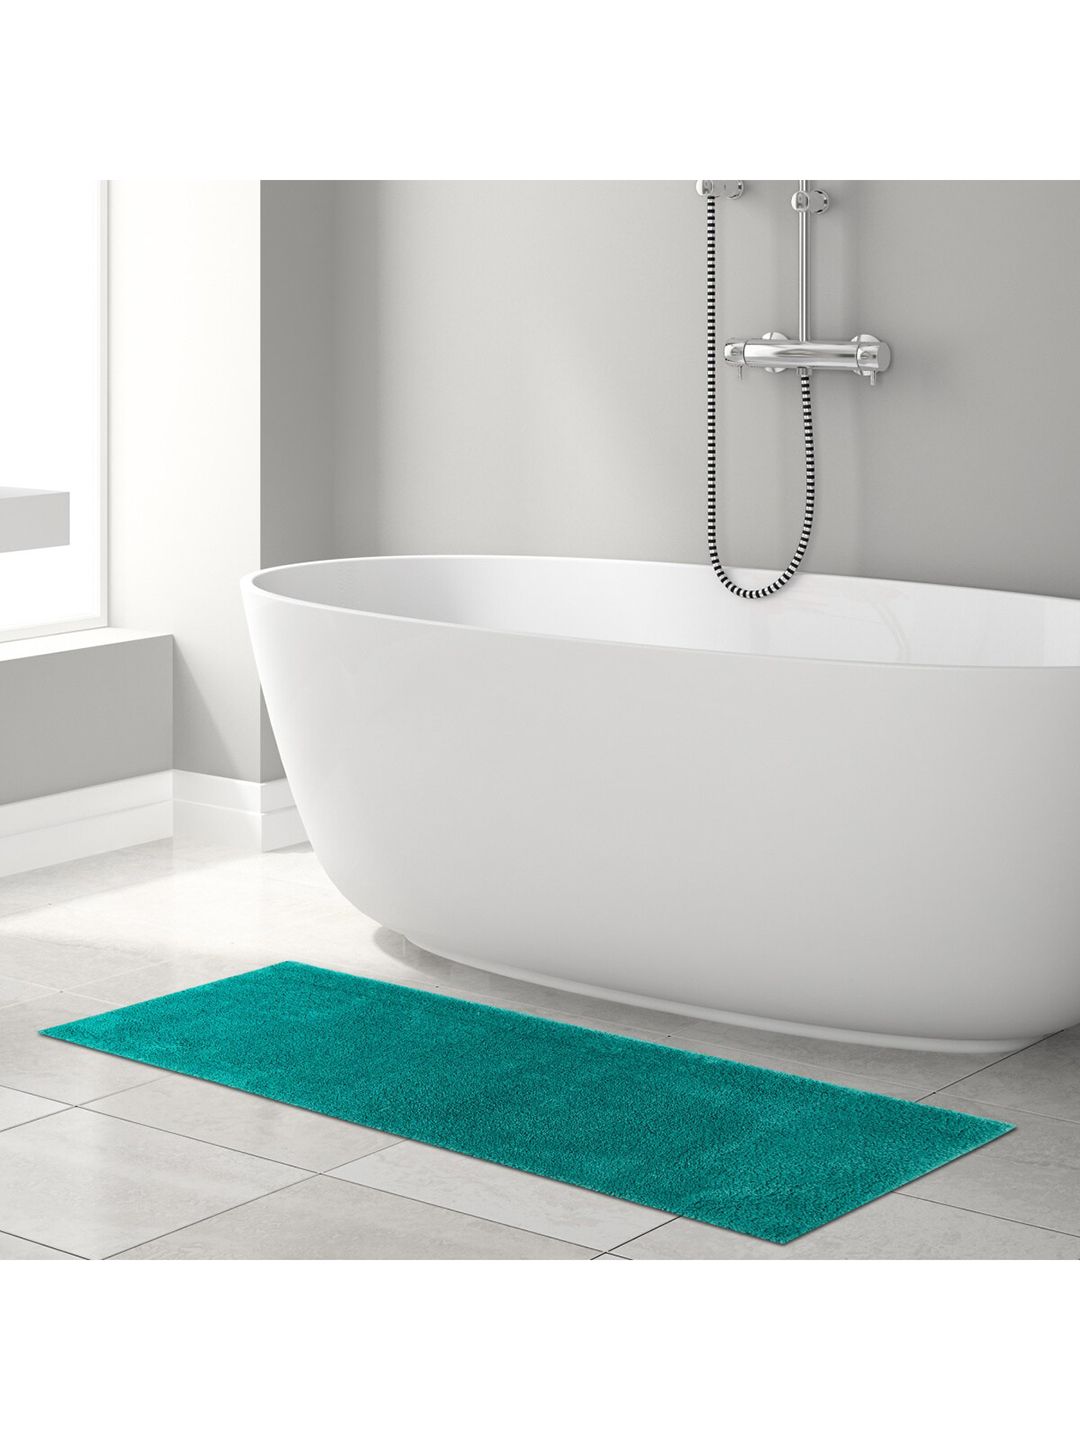 Home Centre Teal Green Textured Bath Runner Price in India